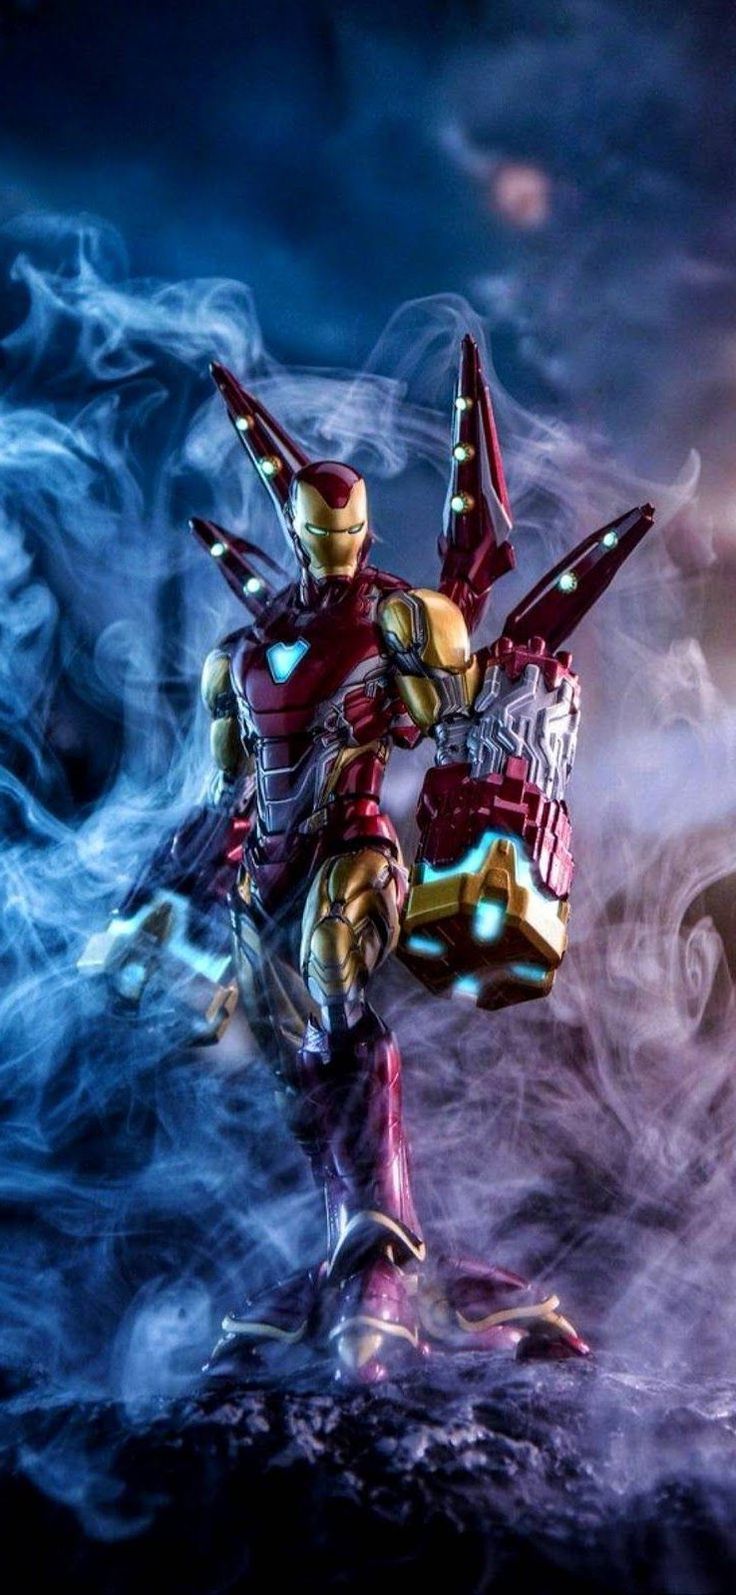 Iron Man Wallpaper For Mobile Phone Tablet Desktop Puter And